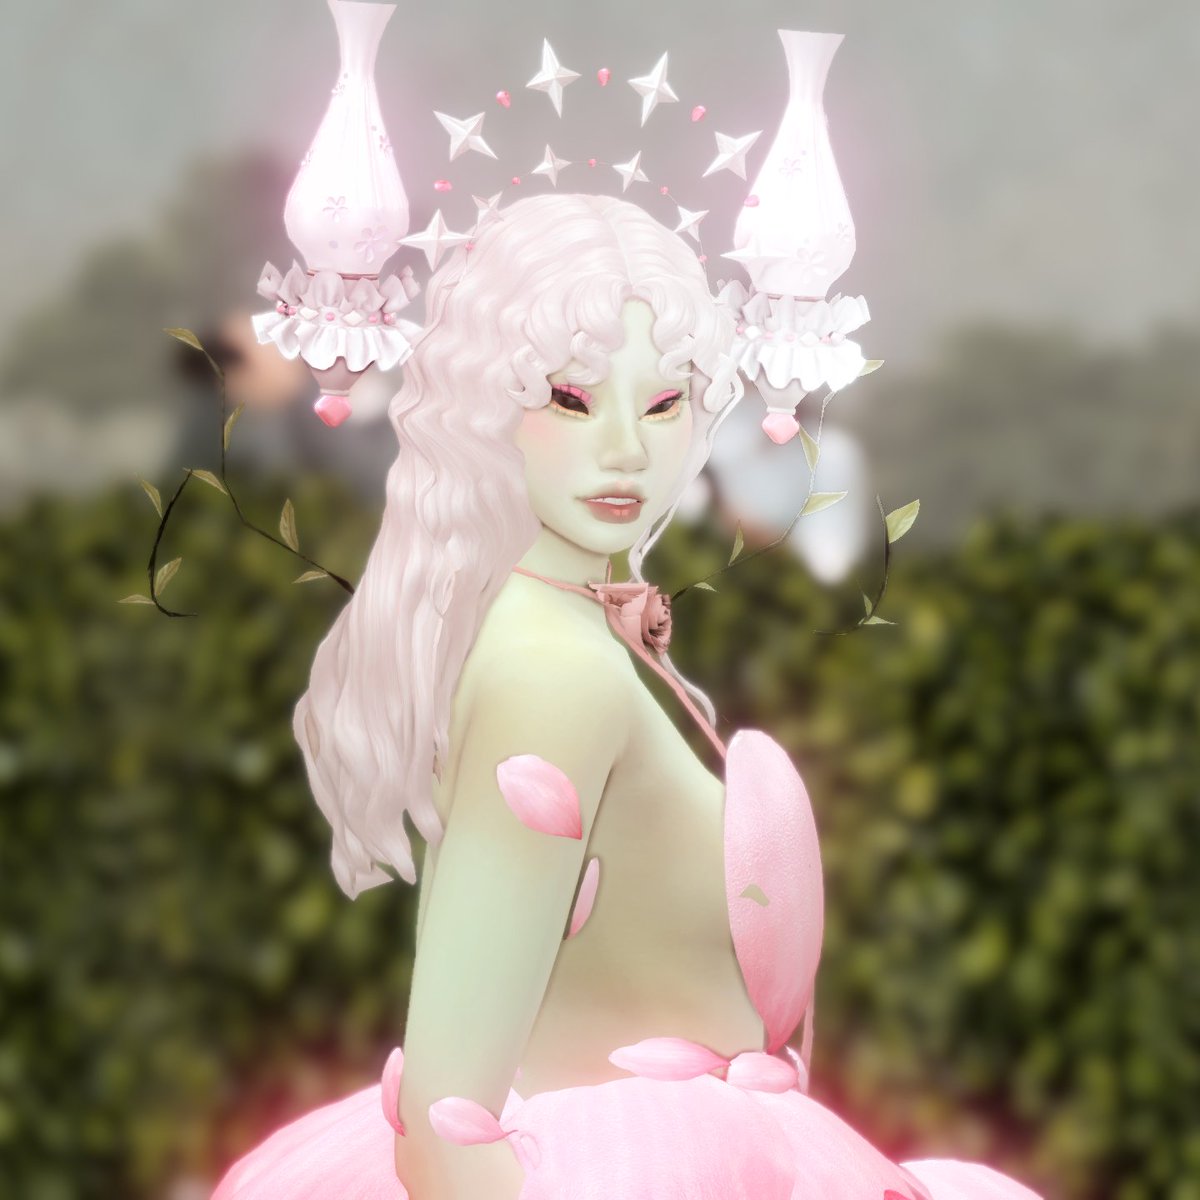 Mimosa Berry arrives at the Met Gala fashionably late

#Sims4MetGala #TheSims4 #showusyoursims